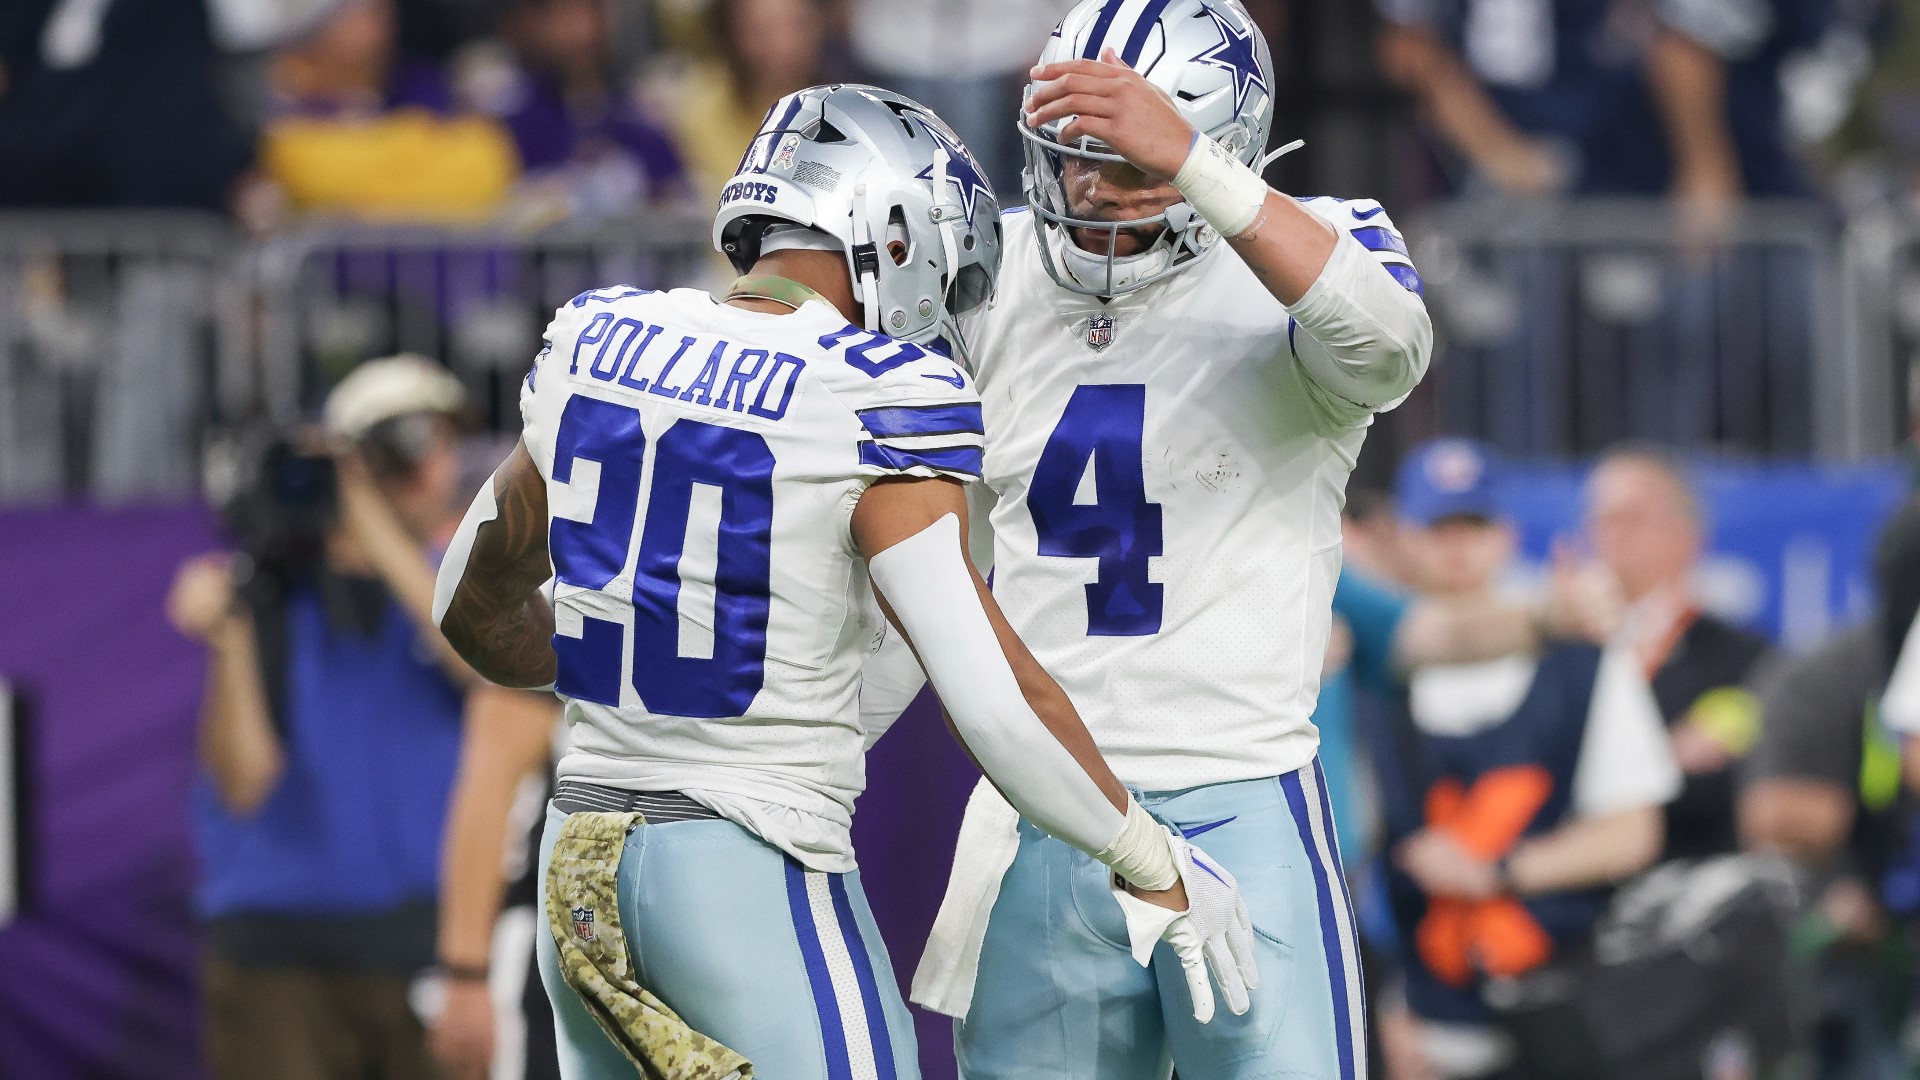 The Dallas Cowboys will have NFC East pride on the line on Thanksgiving Day as they welcome the New York Giants to Arlington in a matchup between two 7-3 teams.